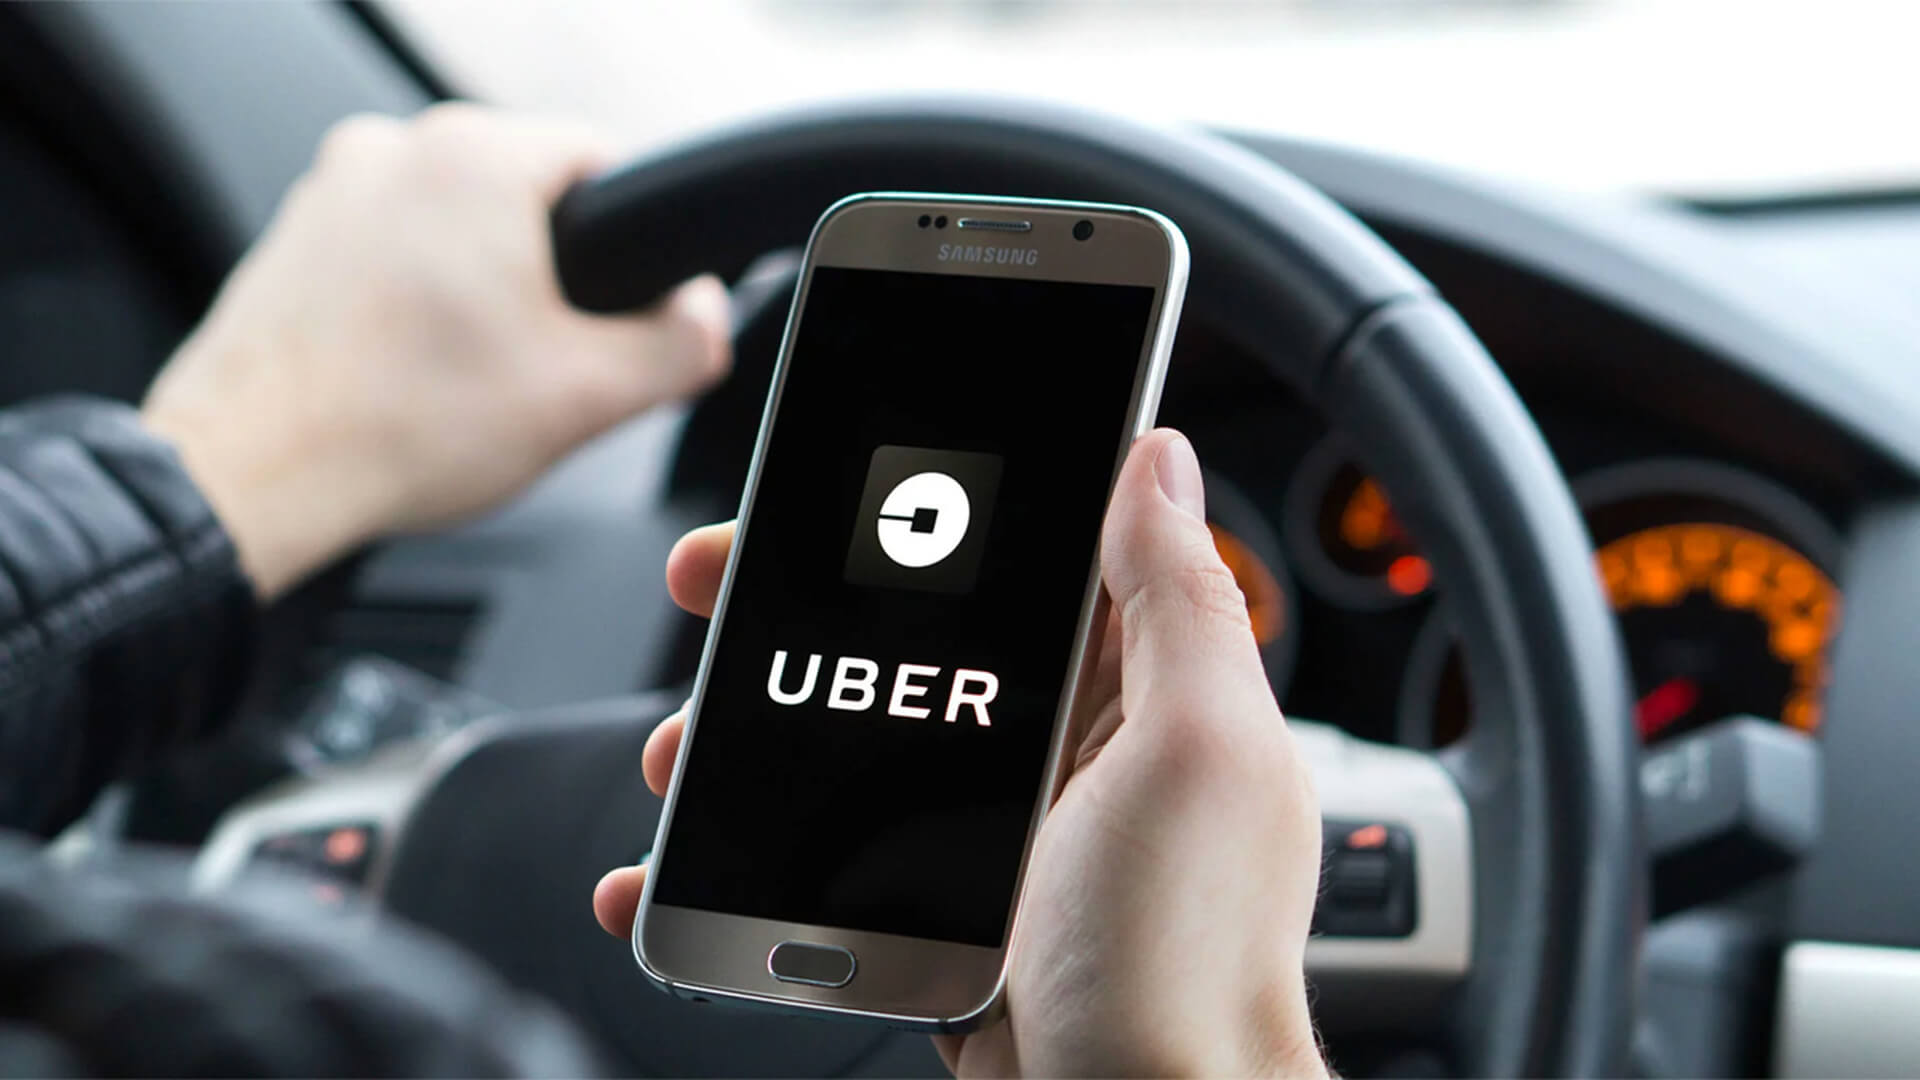 Uber will identify the accident with the help of smartphone